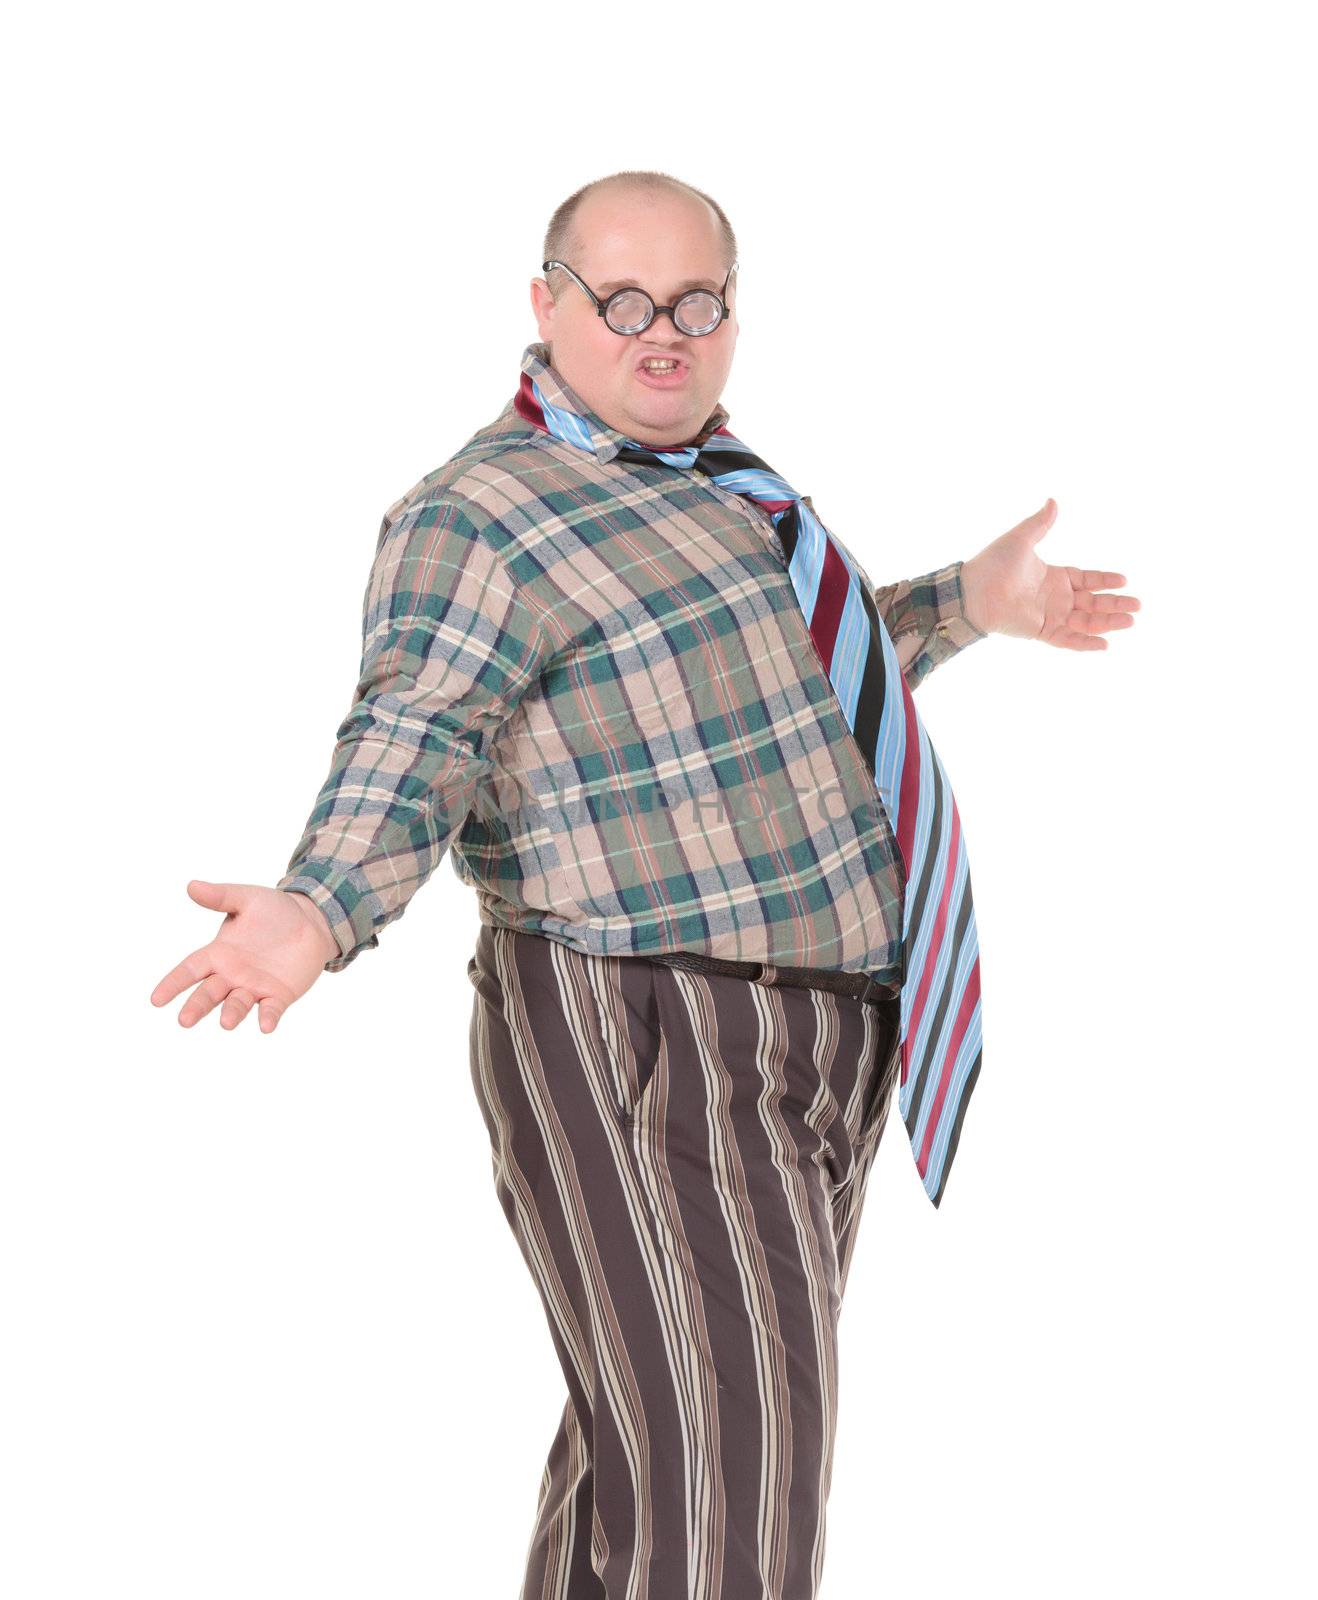 Fun portrait of an obese man with an outrageous fashion sense with oversized flamboyant tie, on white